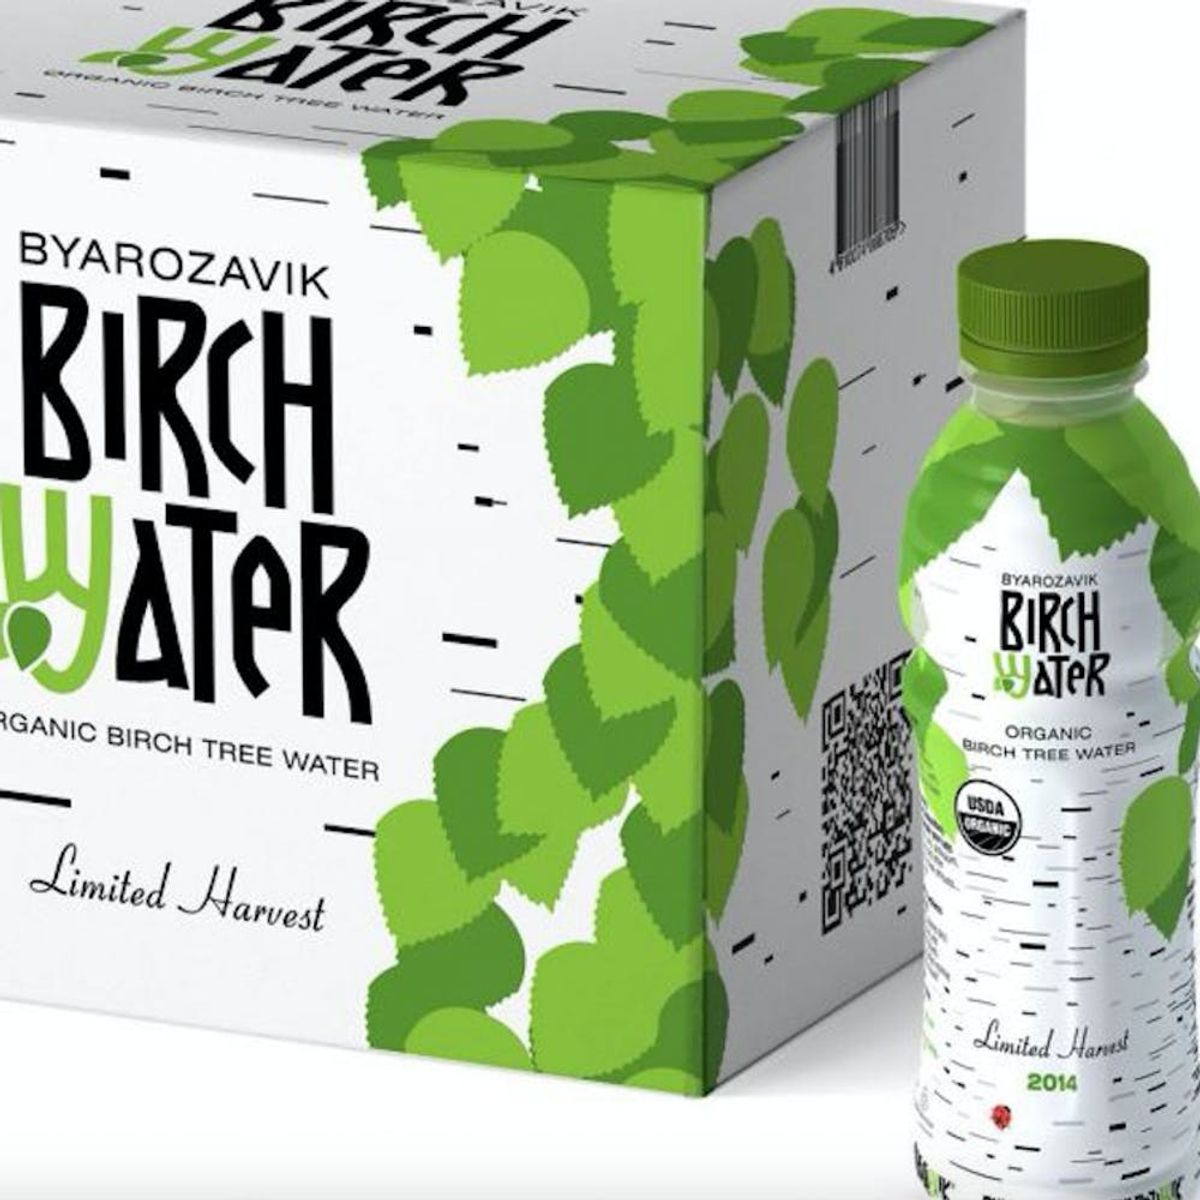 This Weird Tree-Based Drink Is the New Kombucha